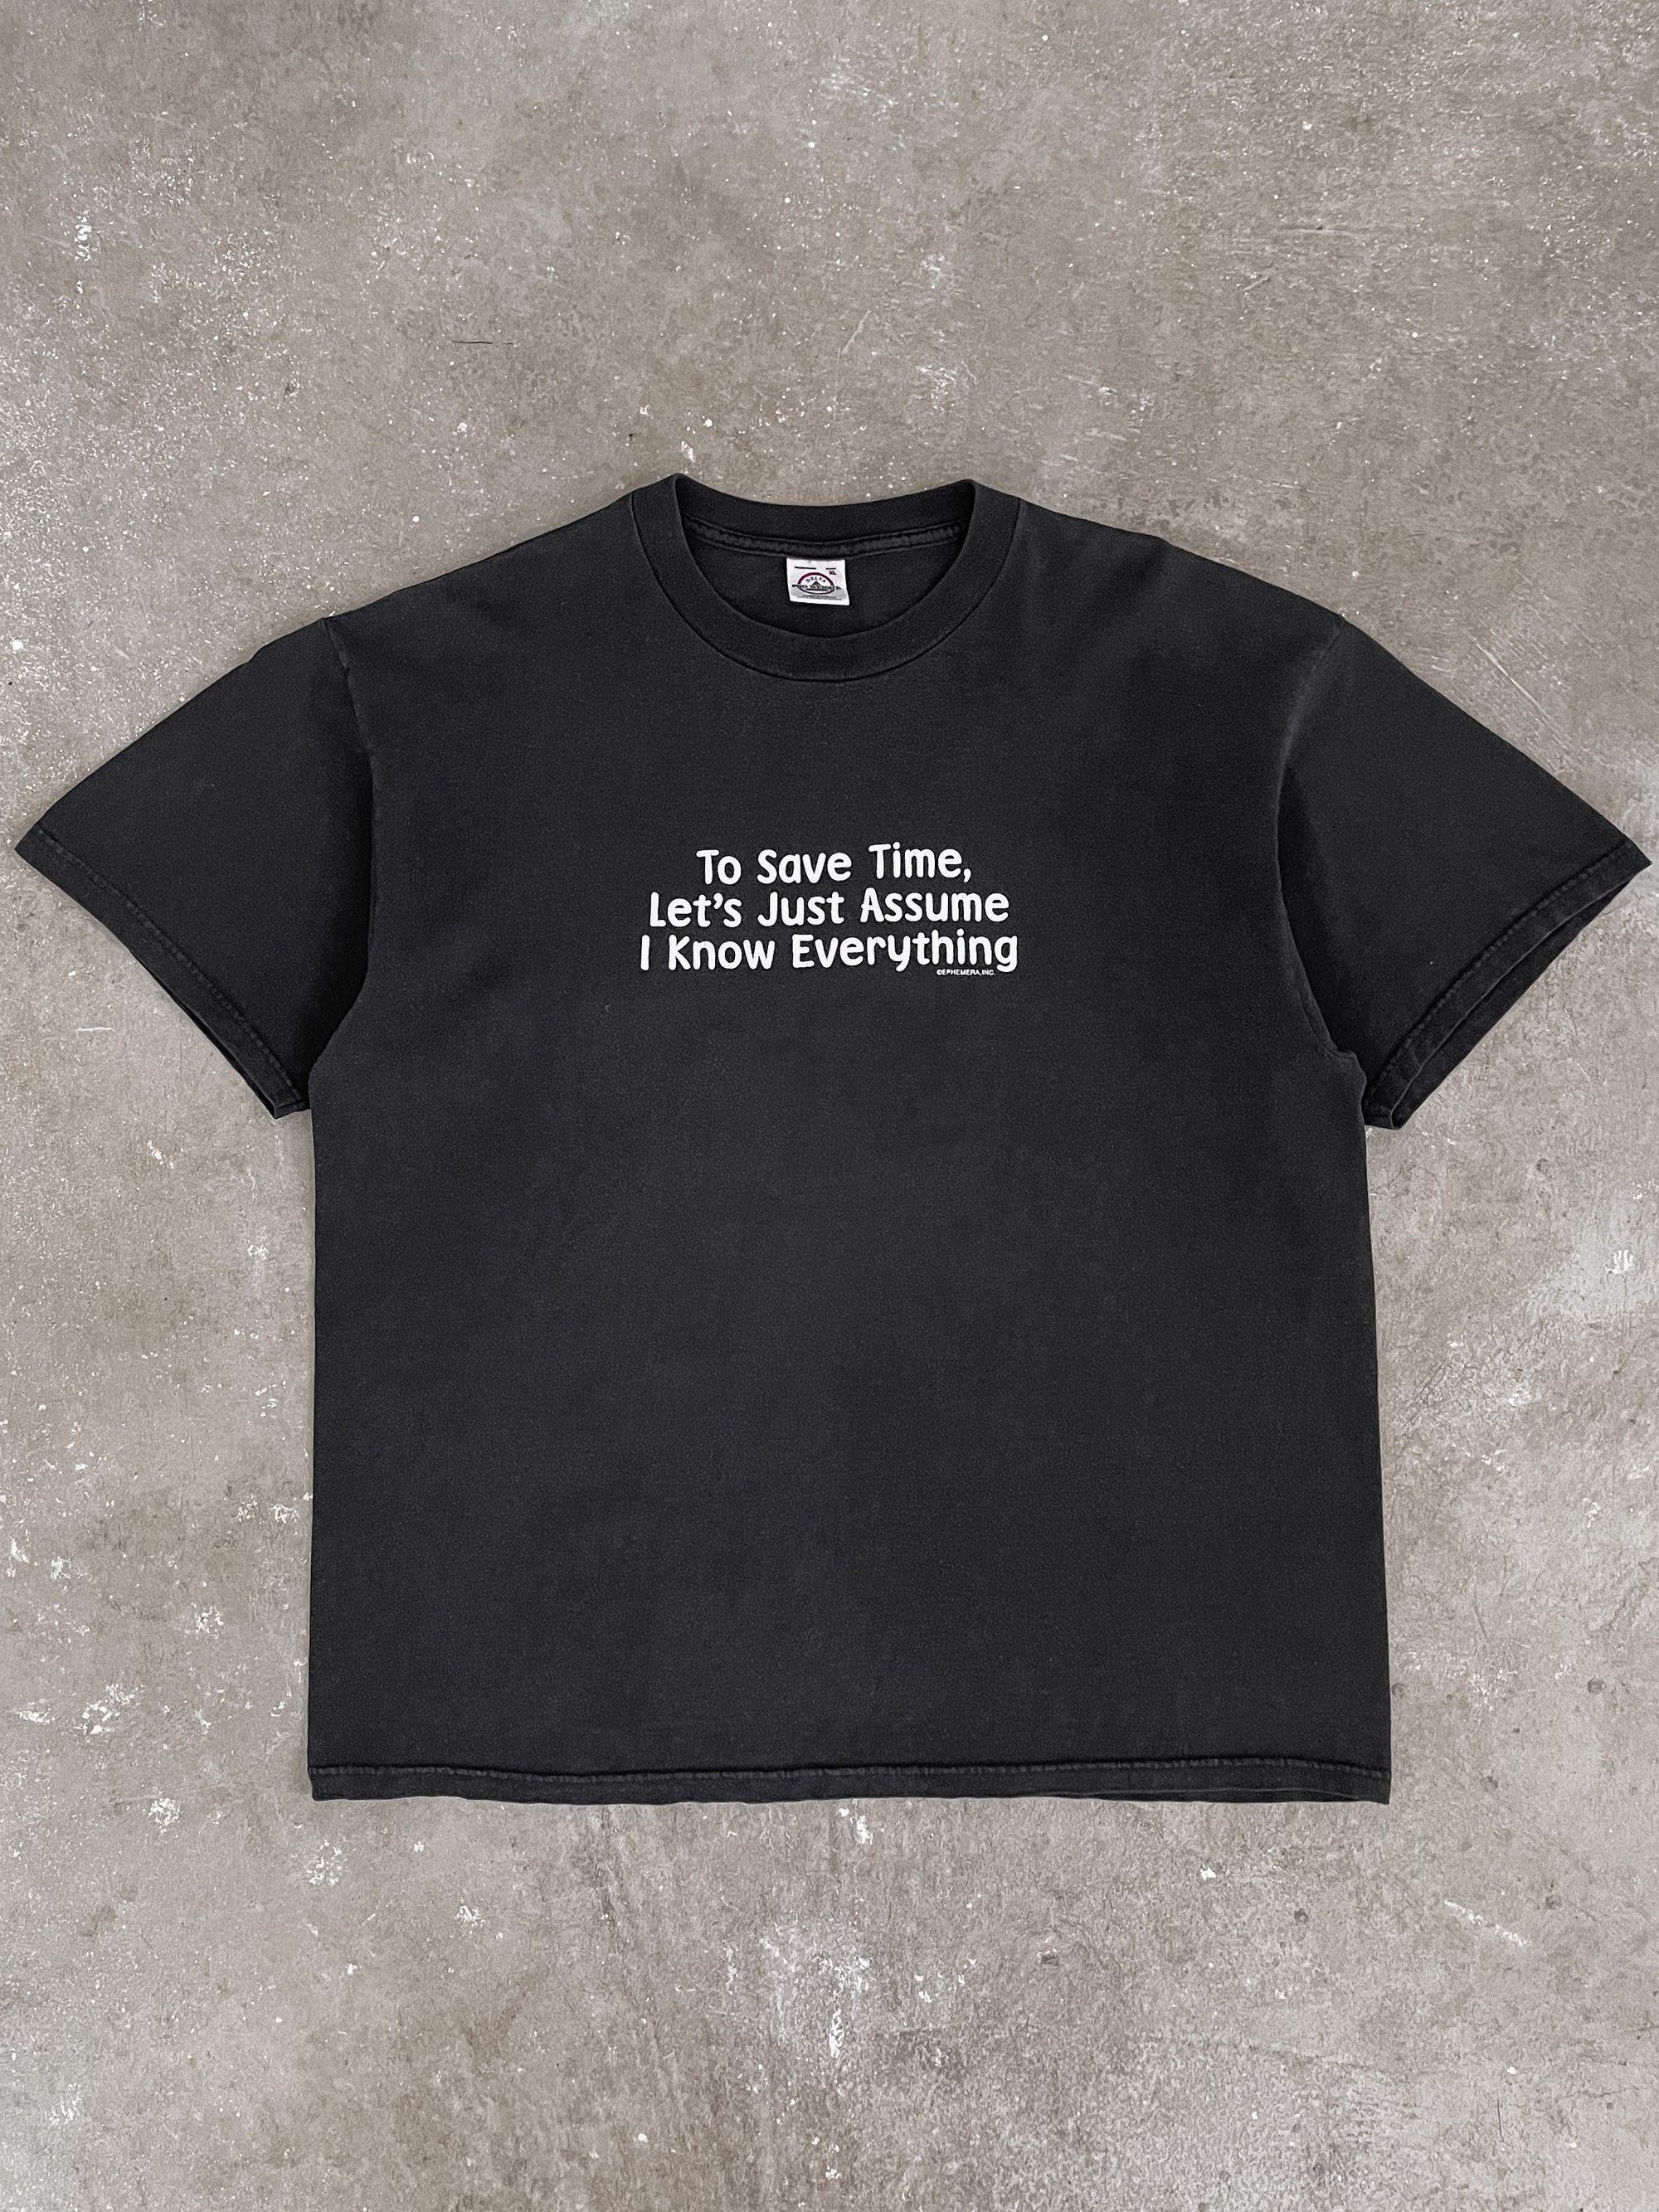 2000s “Let’s Just Assume I Know Everything” Tee (XL)